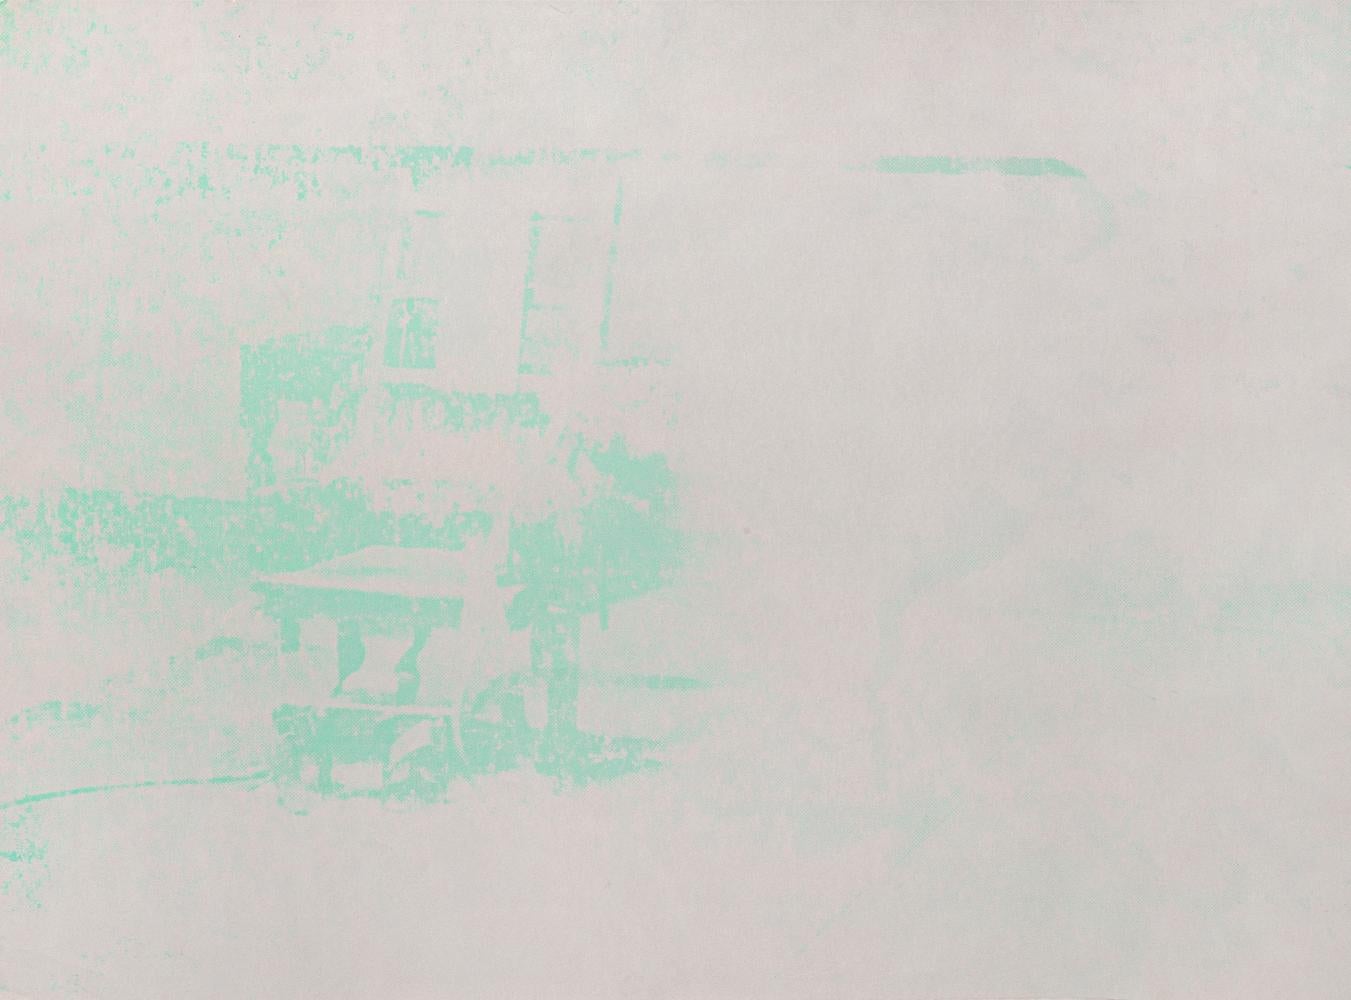 Electric Chair  - Print by Andy Warhol